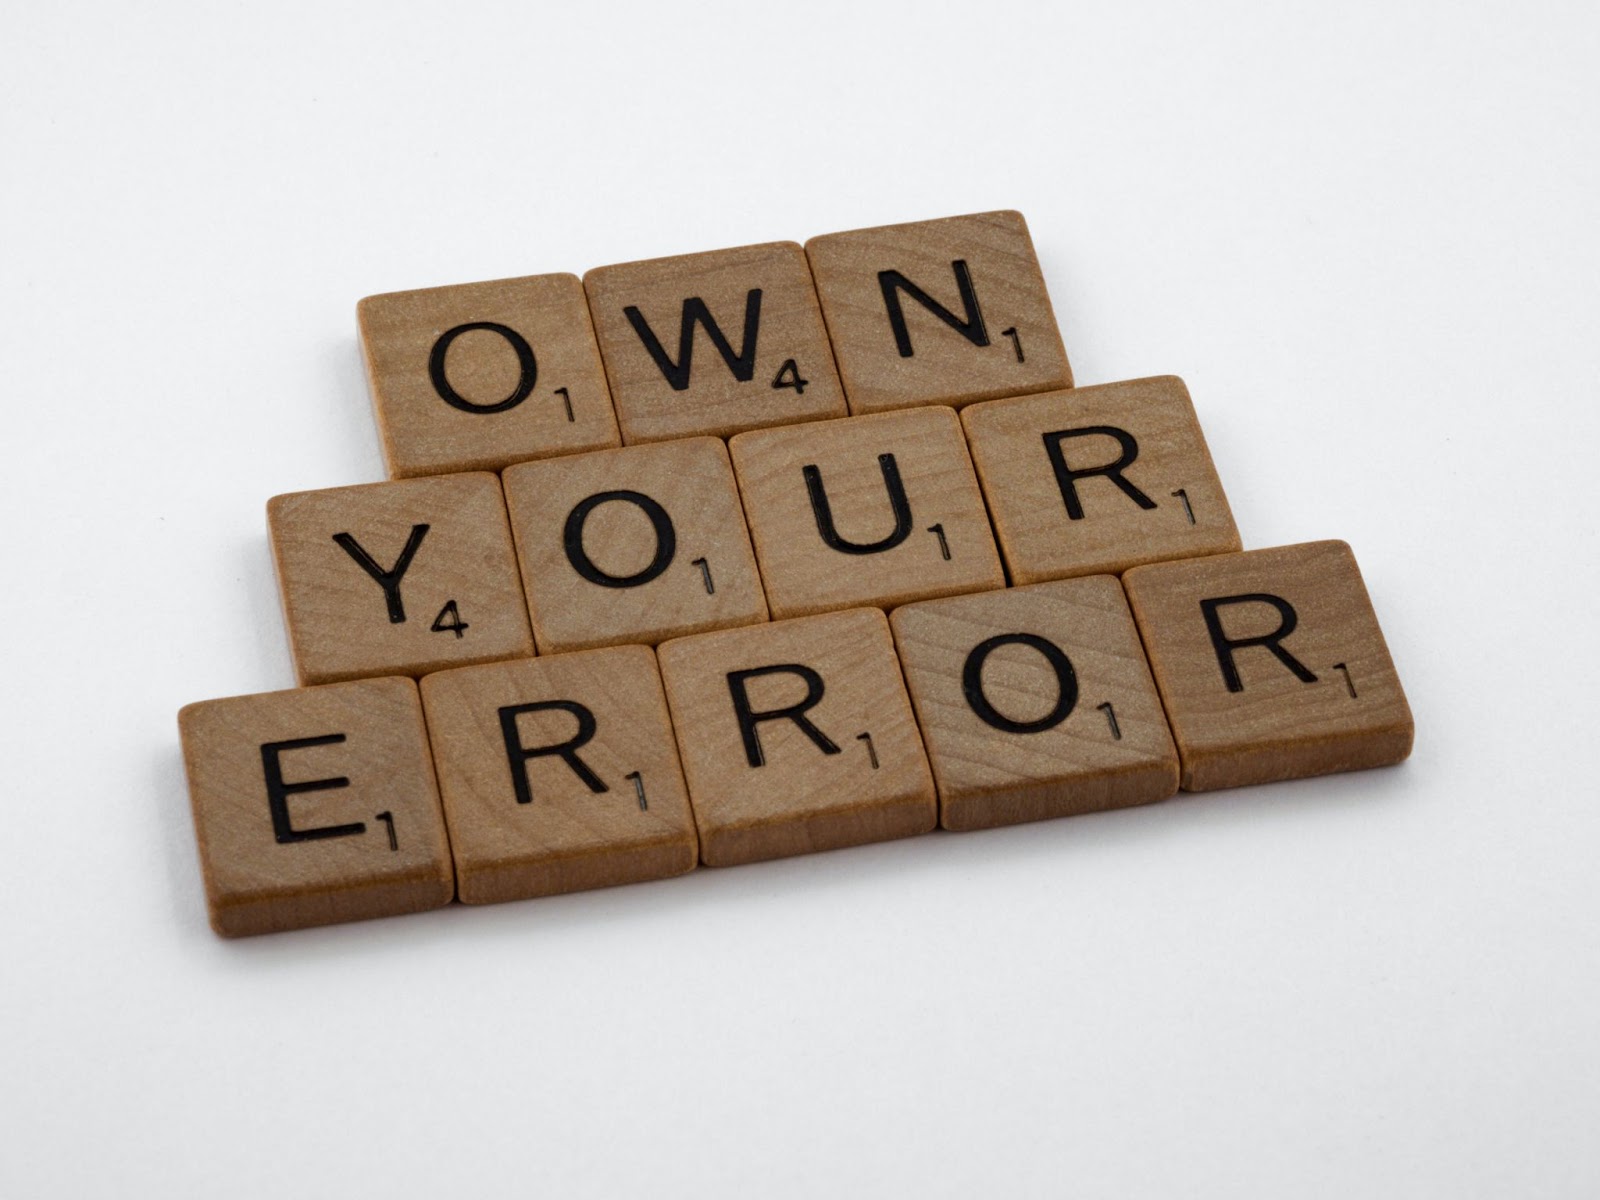 Scrabble tiles on a white background spelling out “Own your error”